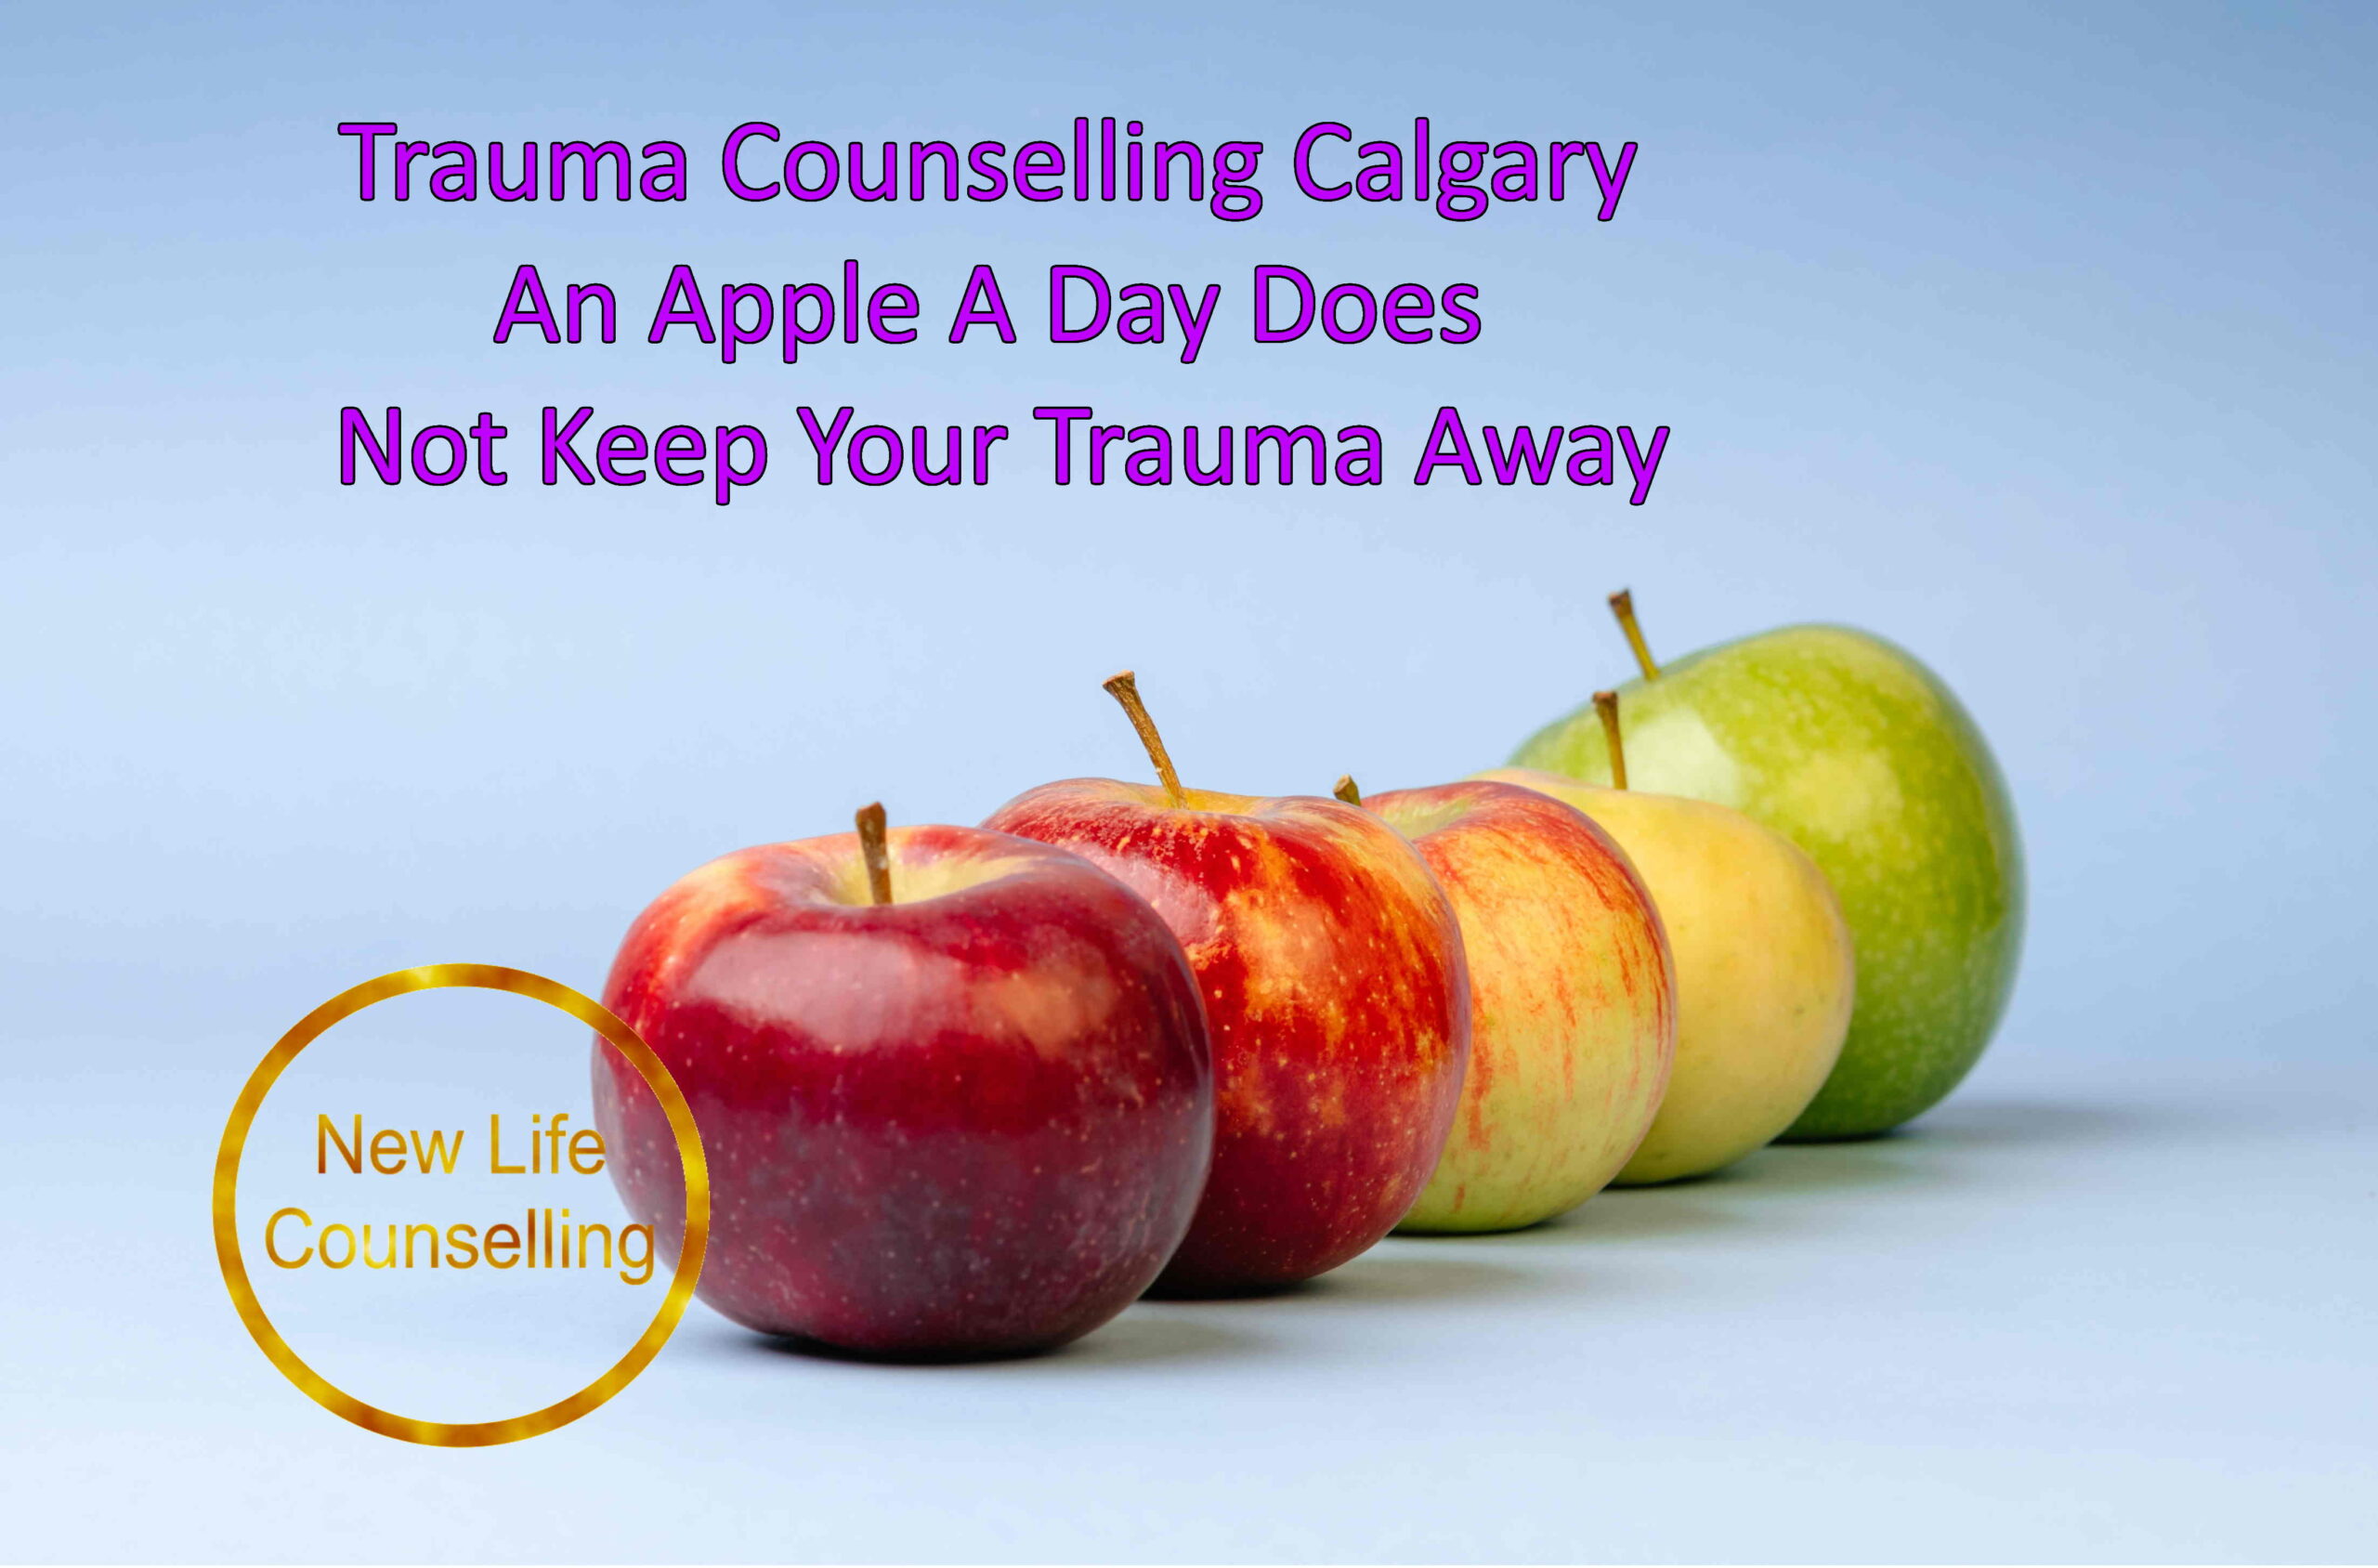 You are currently viewing Trauma Counselling Calgary ‘An Apple a Day Does Not Keep Your Trauma Away’